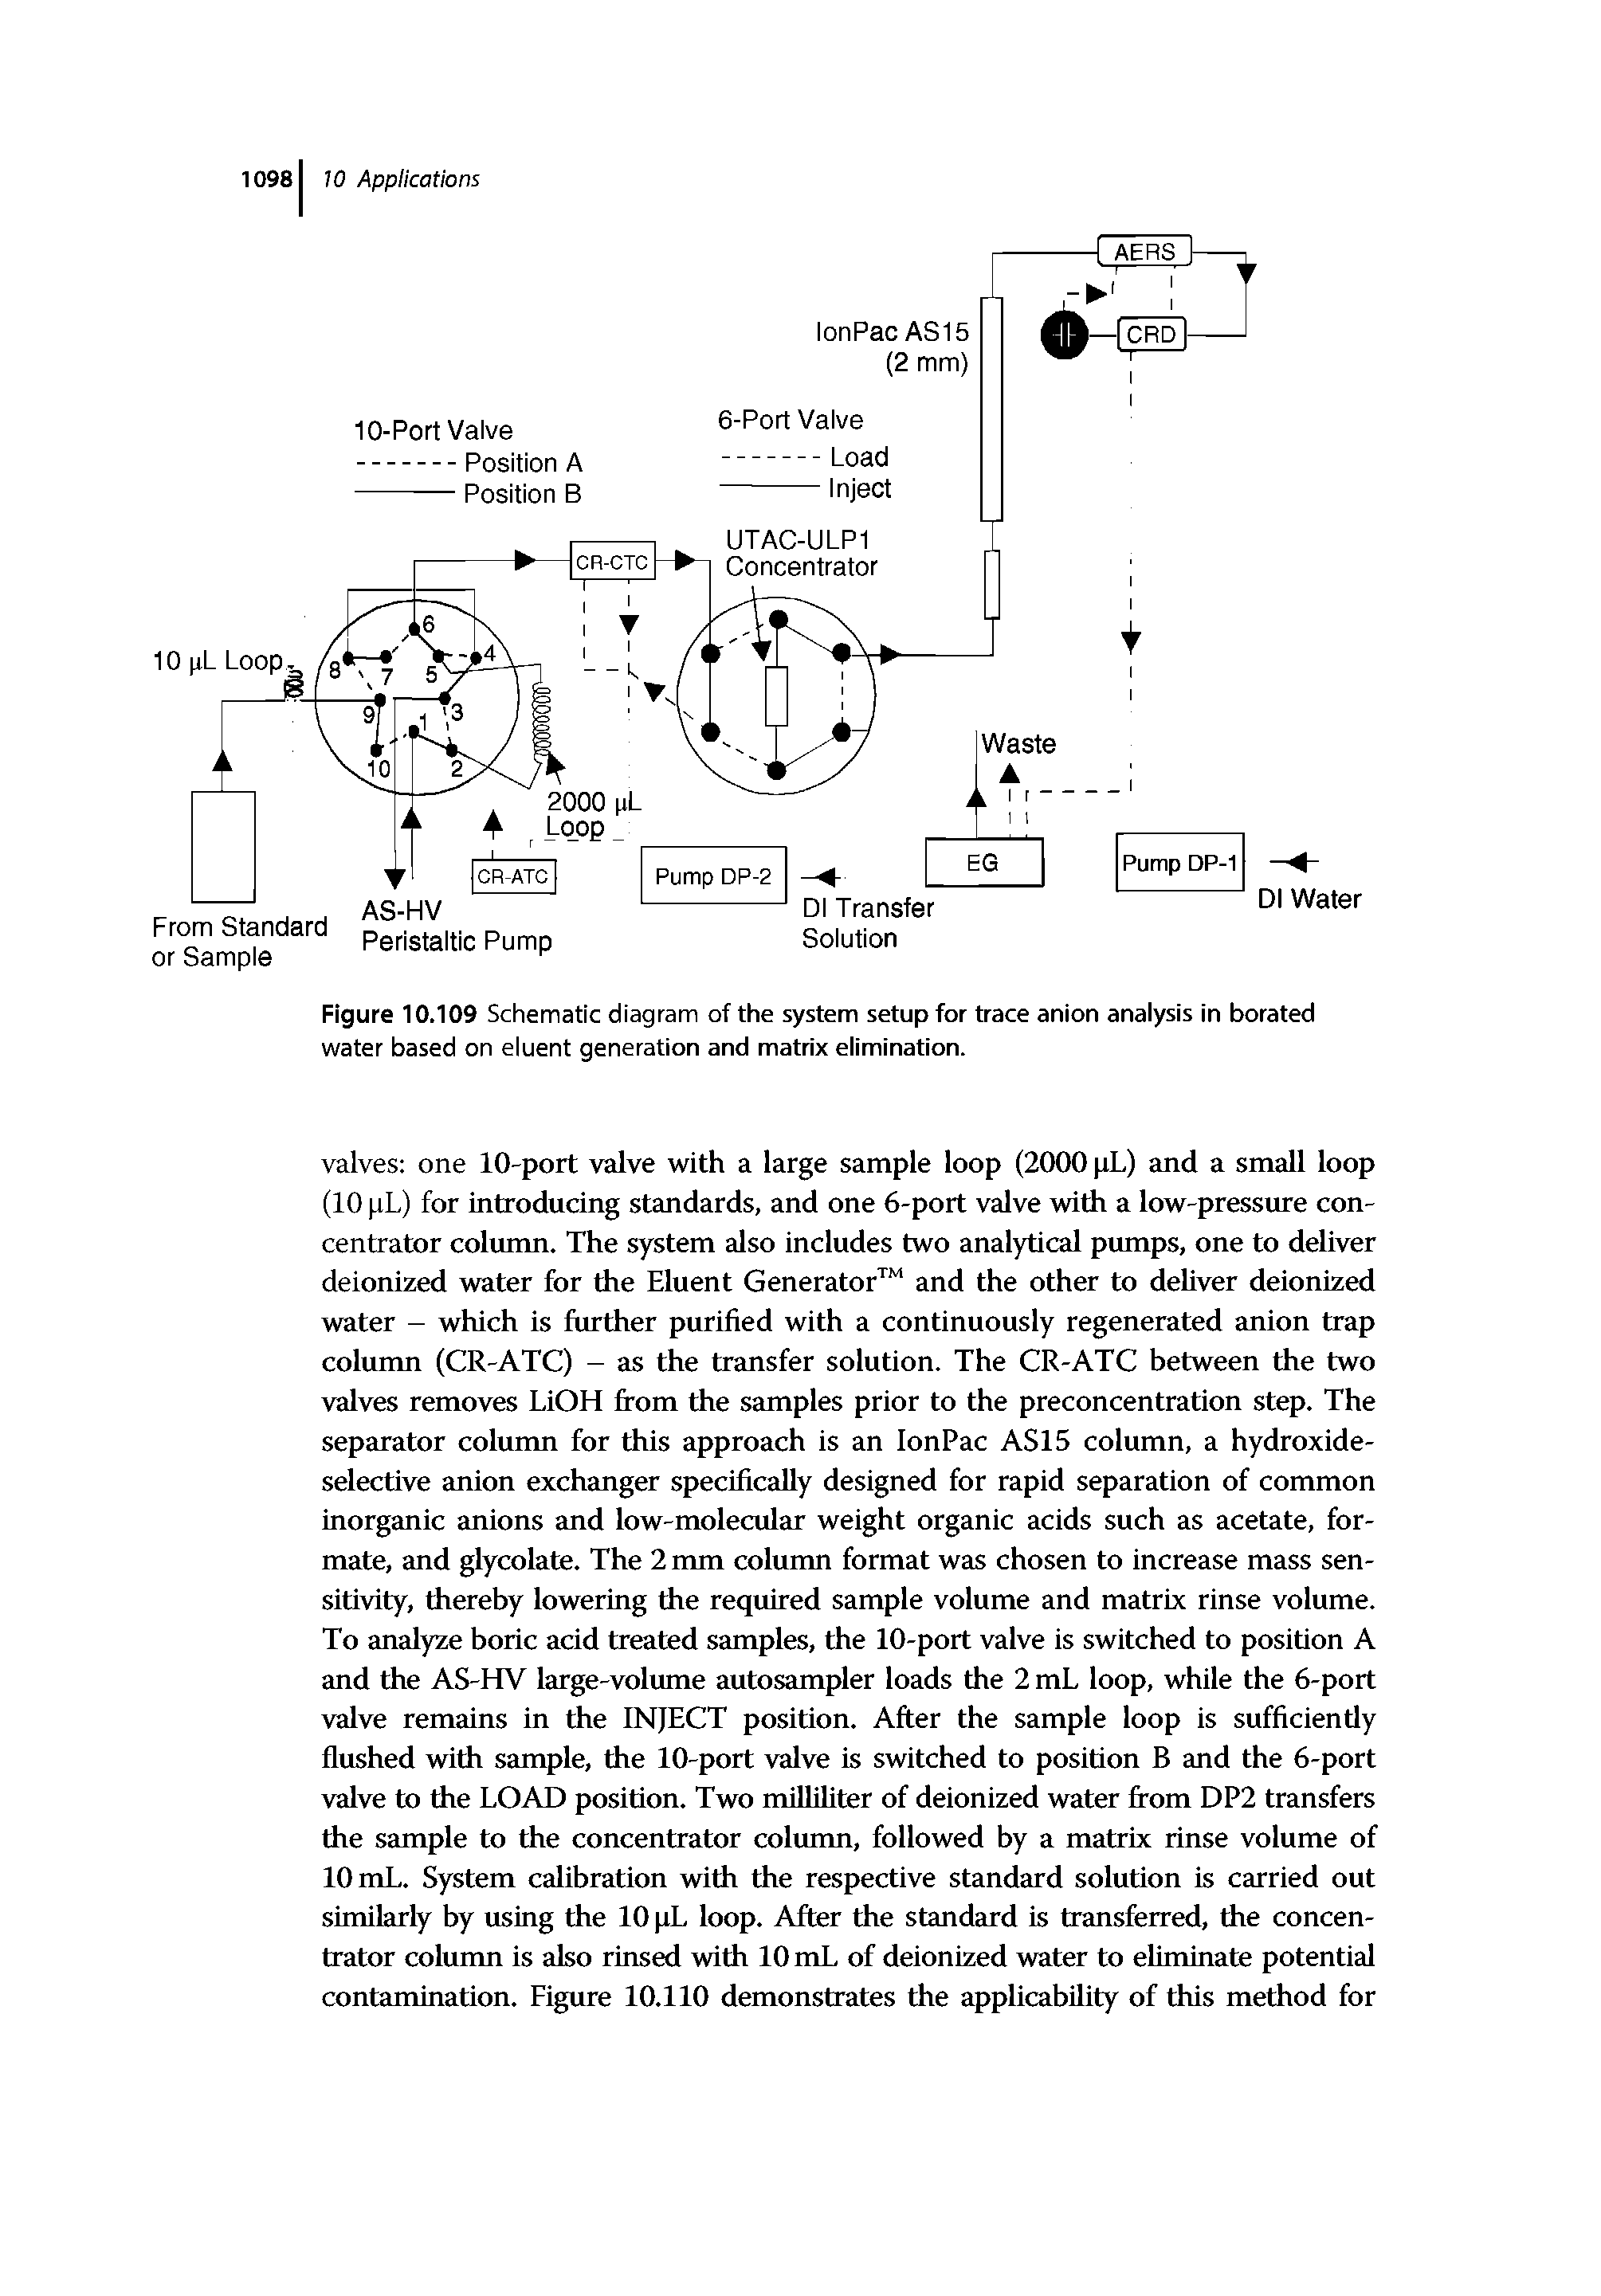 Figure 10.109 Schematic diagram of the system setup for trace anion anaiysis in borated water based on eluent generation and matrix eiimination.